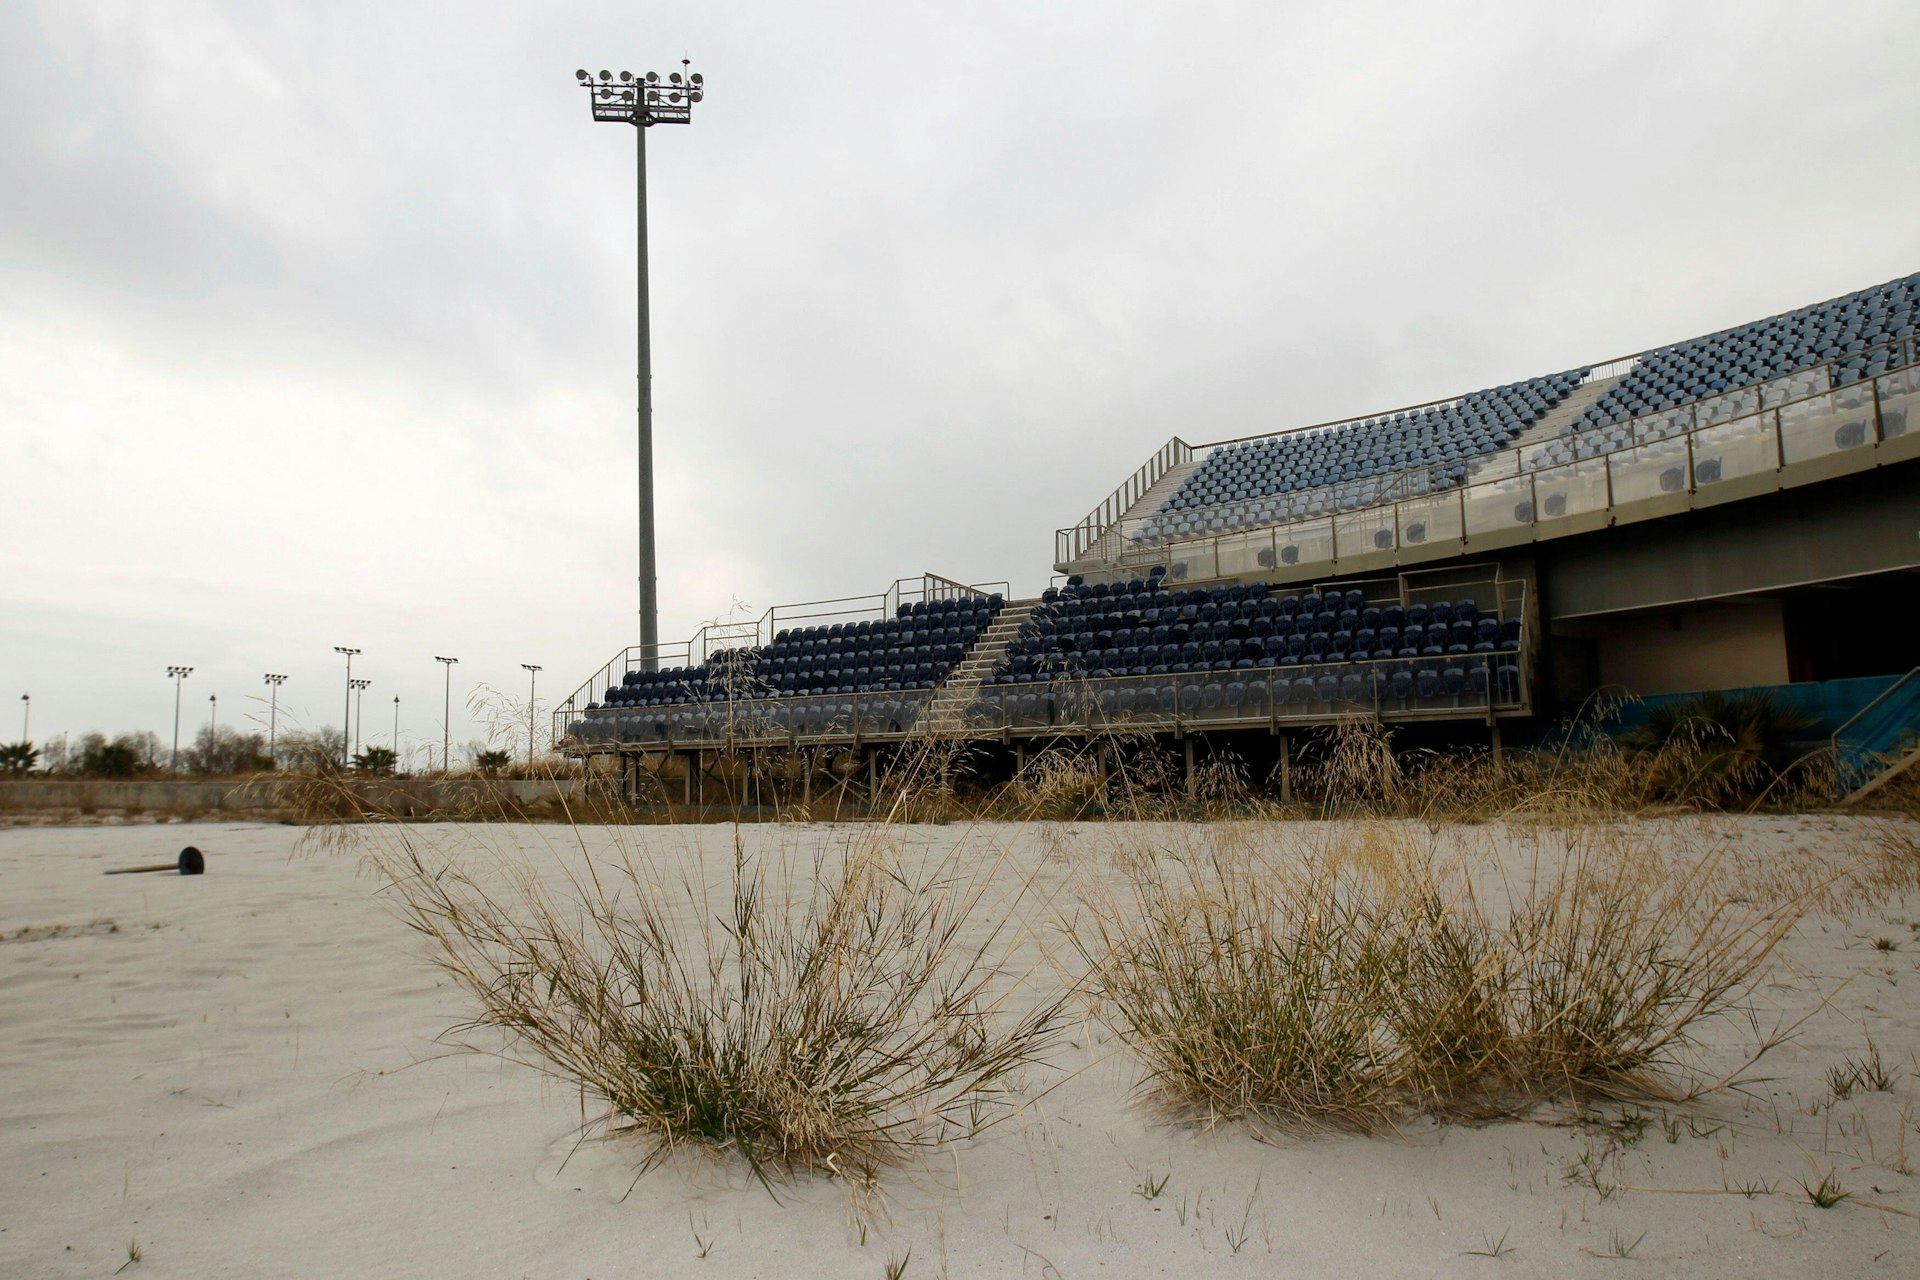 A abandoned Olympic stadium has grass growing in front. 